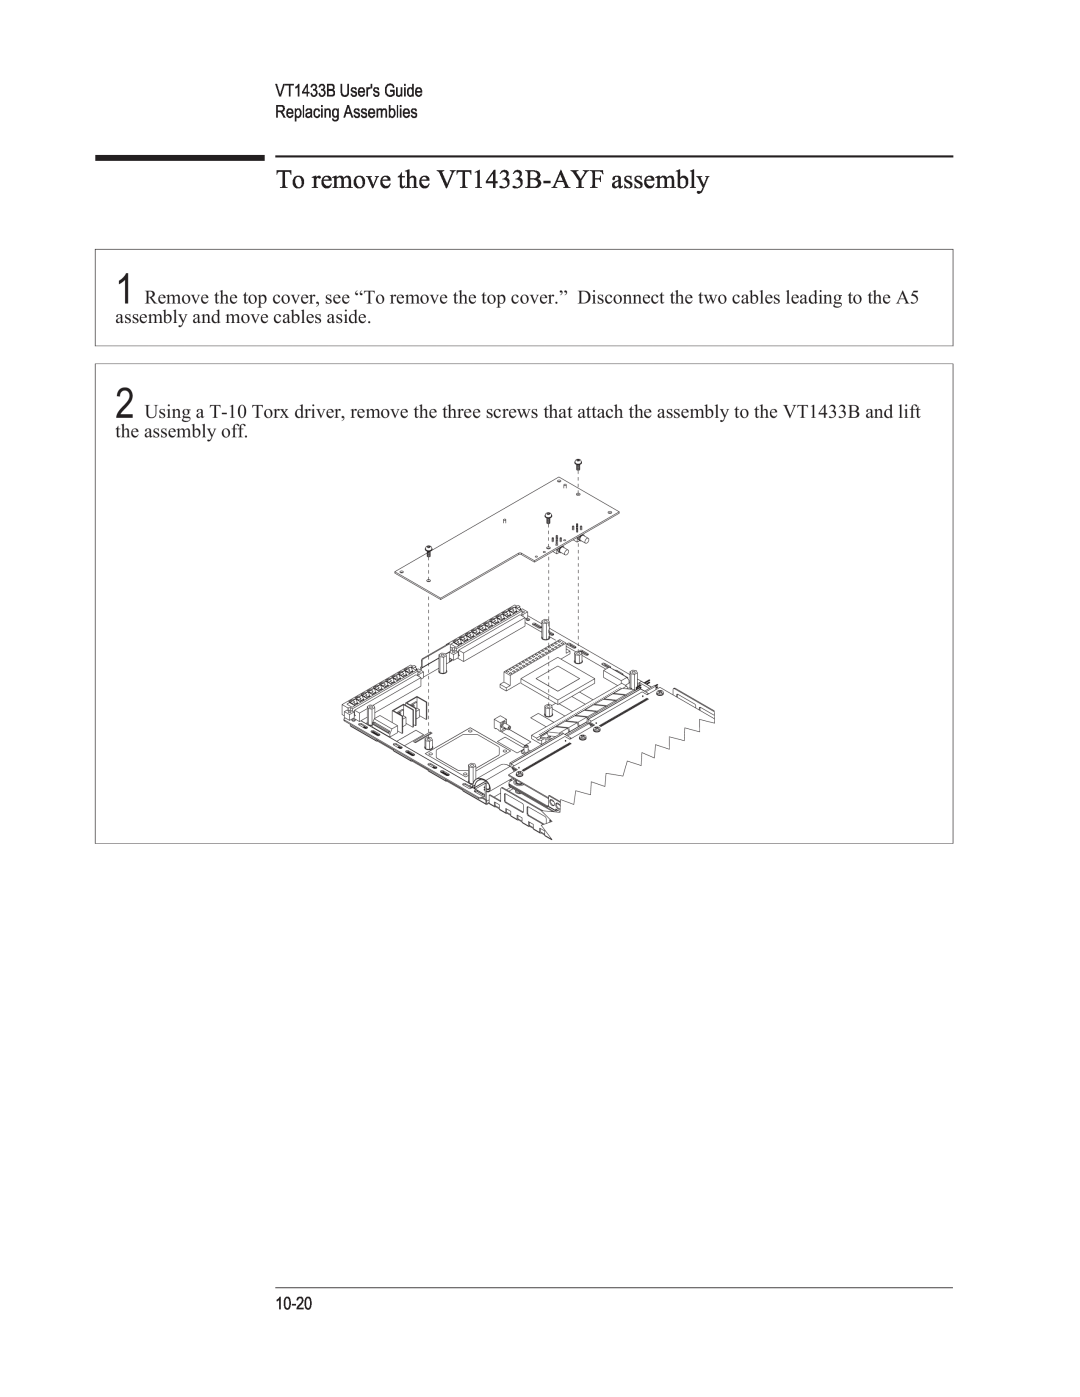 VXI manual To remove the VT1433B-AYFassembly, VT1433B Users Guide Replacing Assemblies, 10-20 